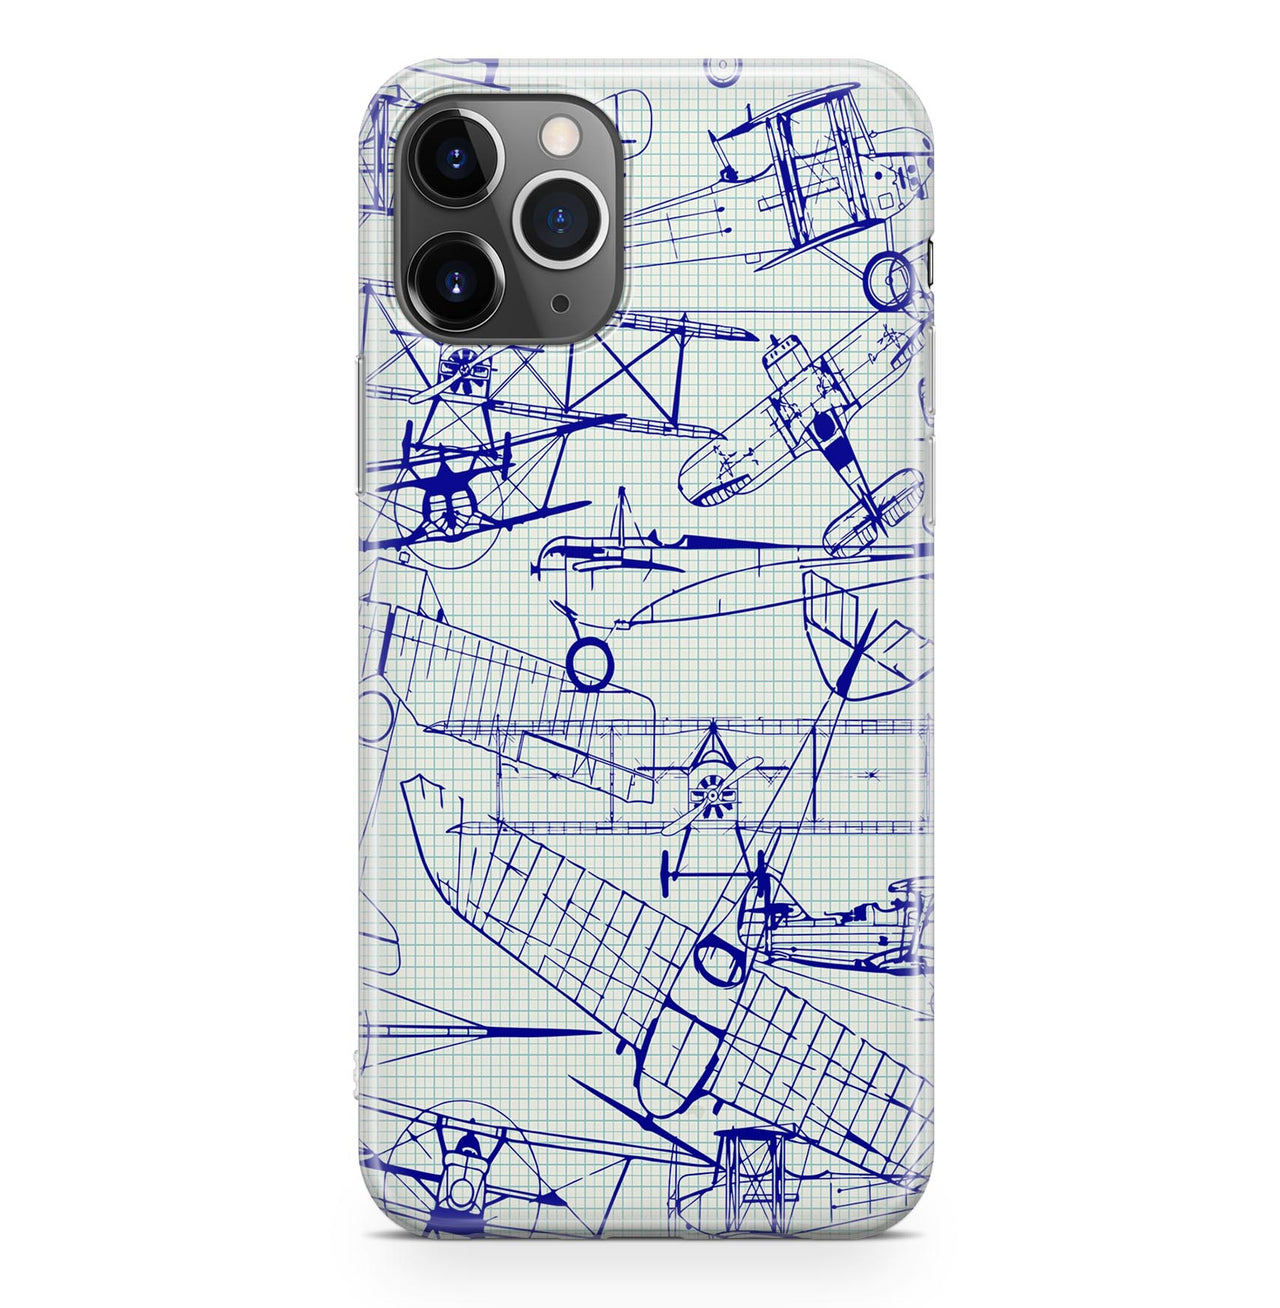 Amazing Drawings of Old Aircrafts Designed iPhone Cases